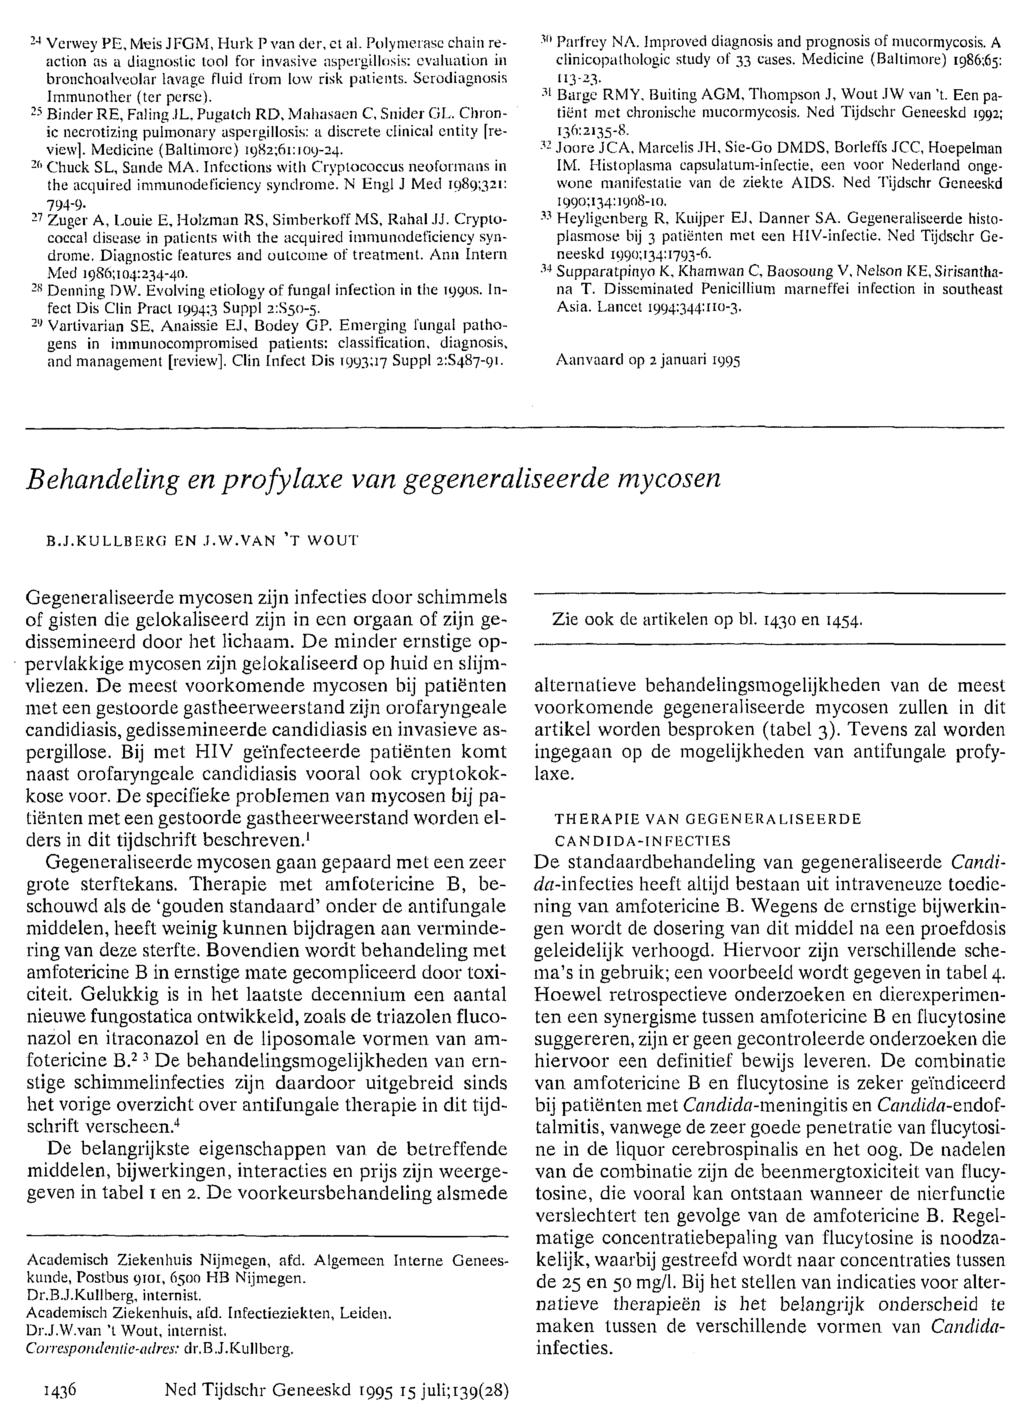 24 Verwey PE, IVfcis JFGM, Hurk P van der, et al. Polymerase chain reaction as a diagnostic too) for invasive aspergillosis: evaluation in bronchoalveolar lavage fluid from low risk patients.